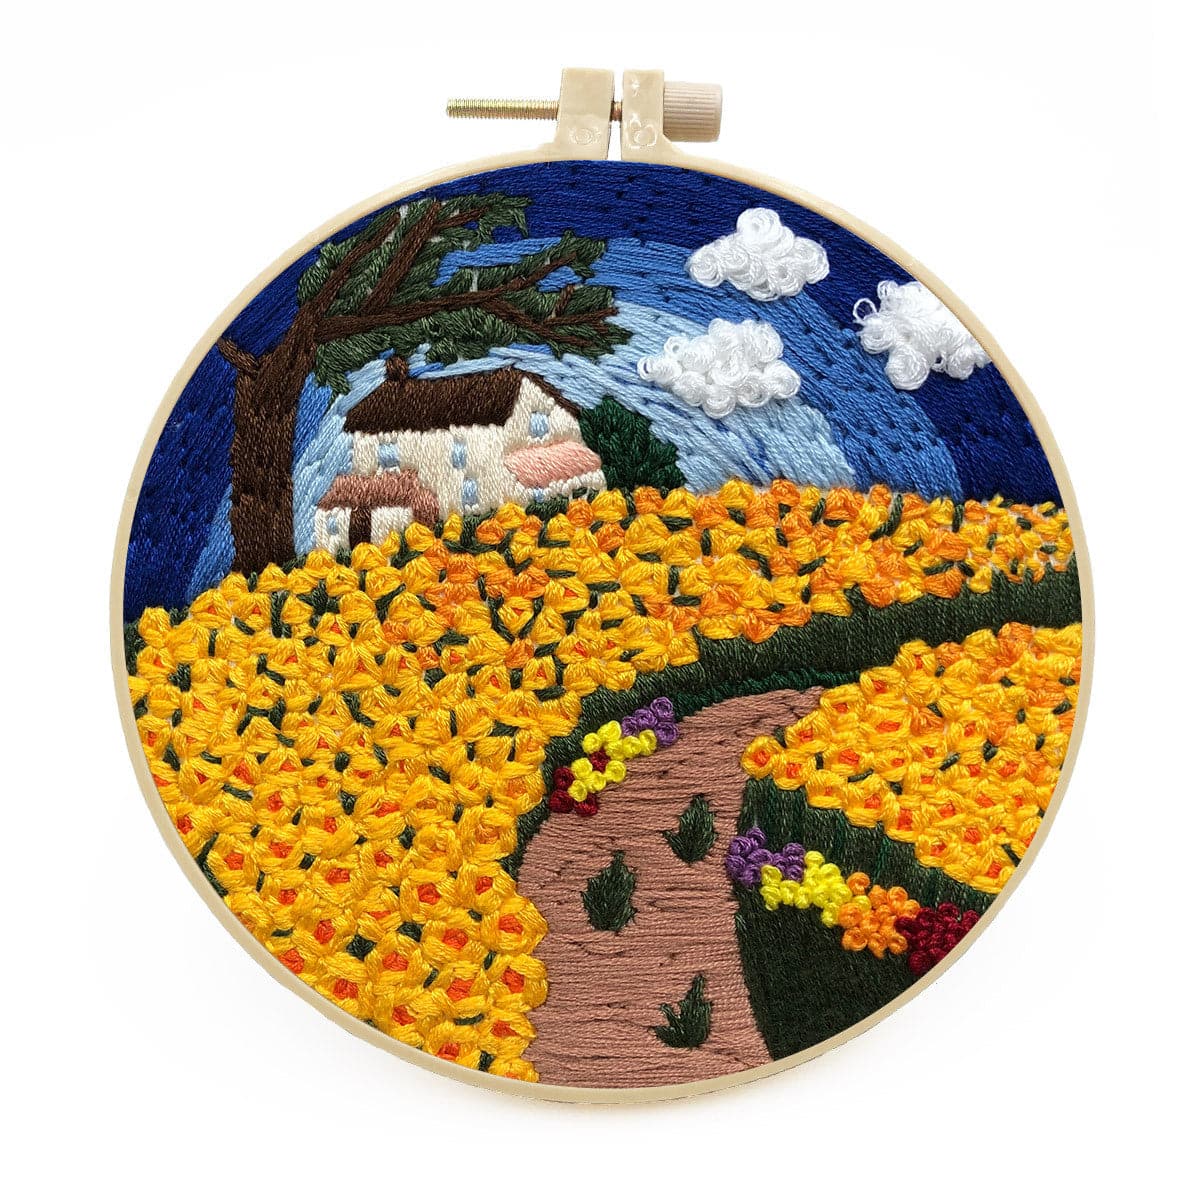 "House in a Field of Flowers" - Embroidery ktclubs.com